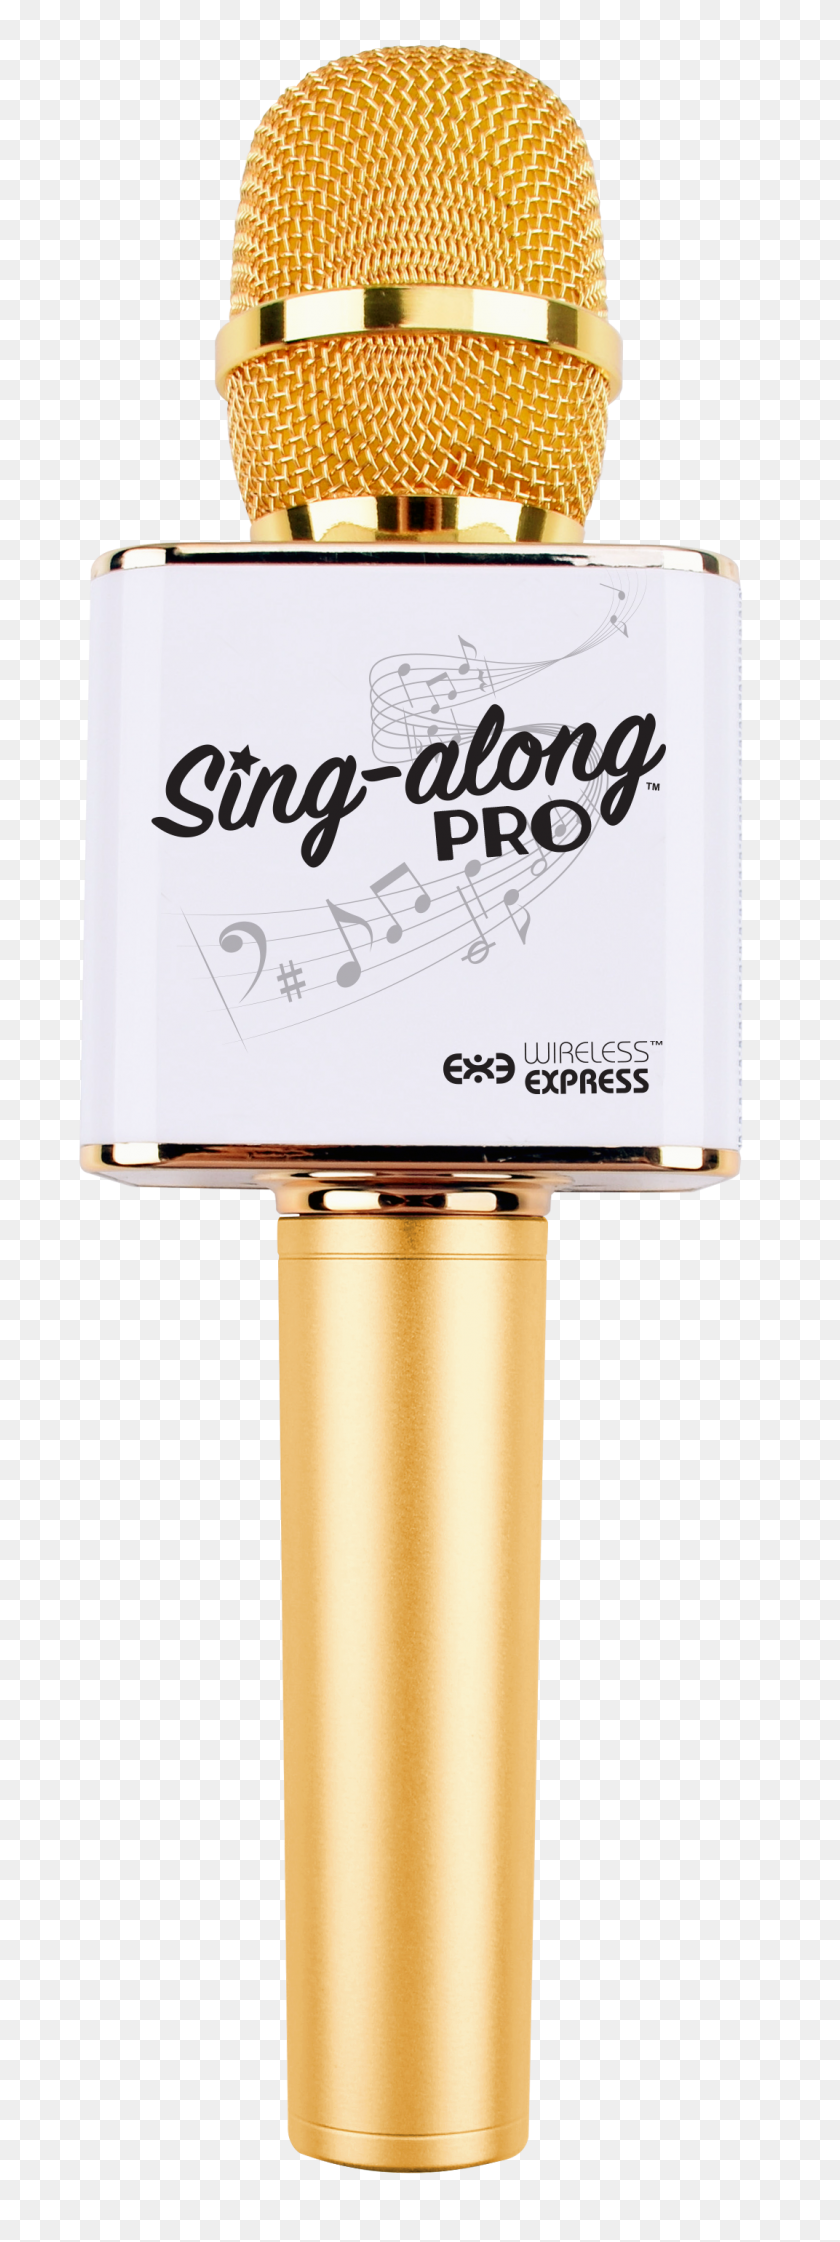 1072x3000 Sing Along Pro Bluetooth Karaoke Microphone And Bluetooth Stereo - Gold Microphone PNG